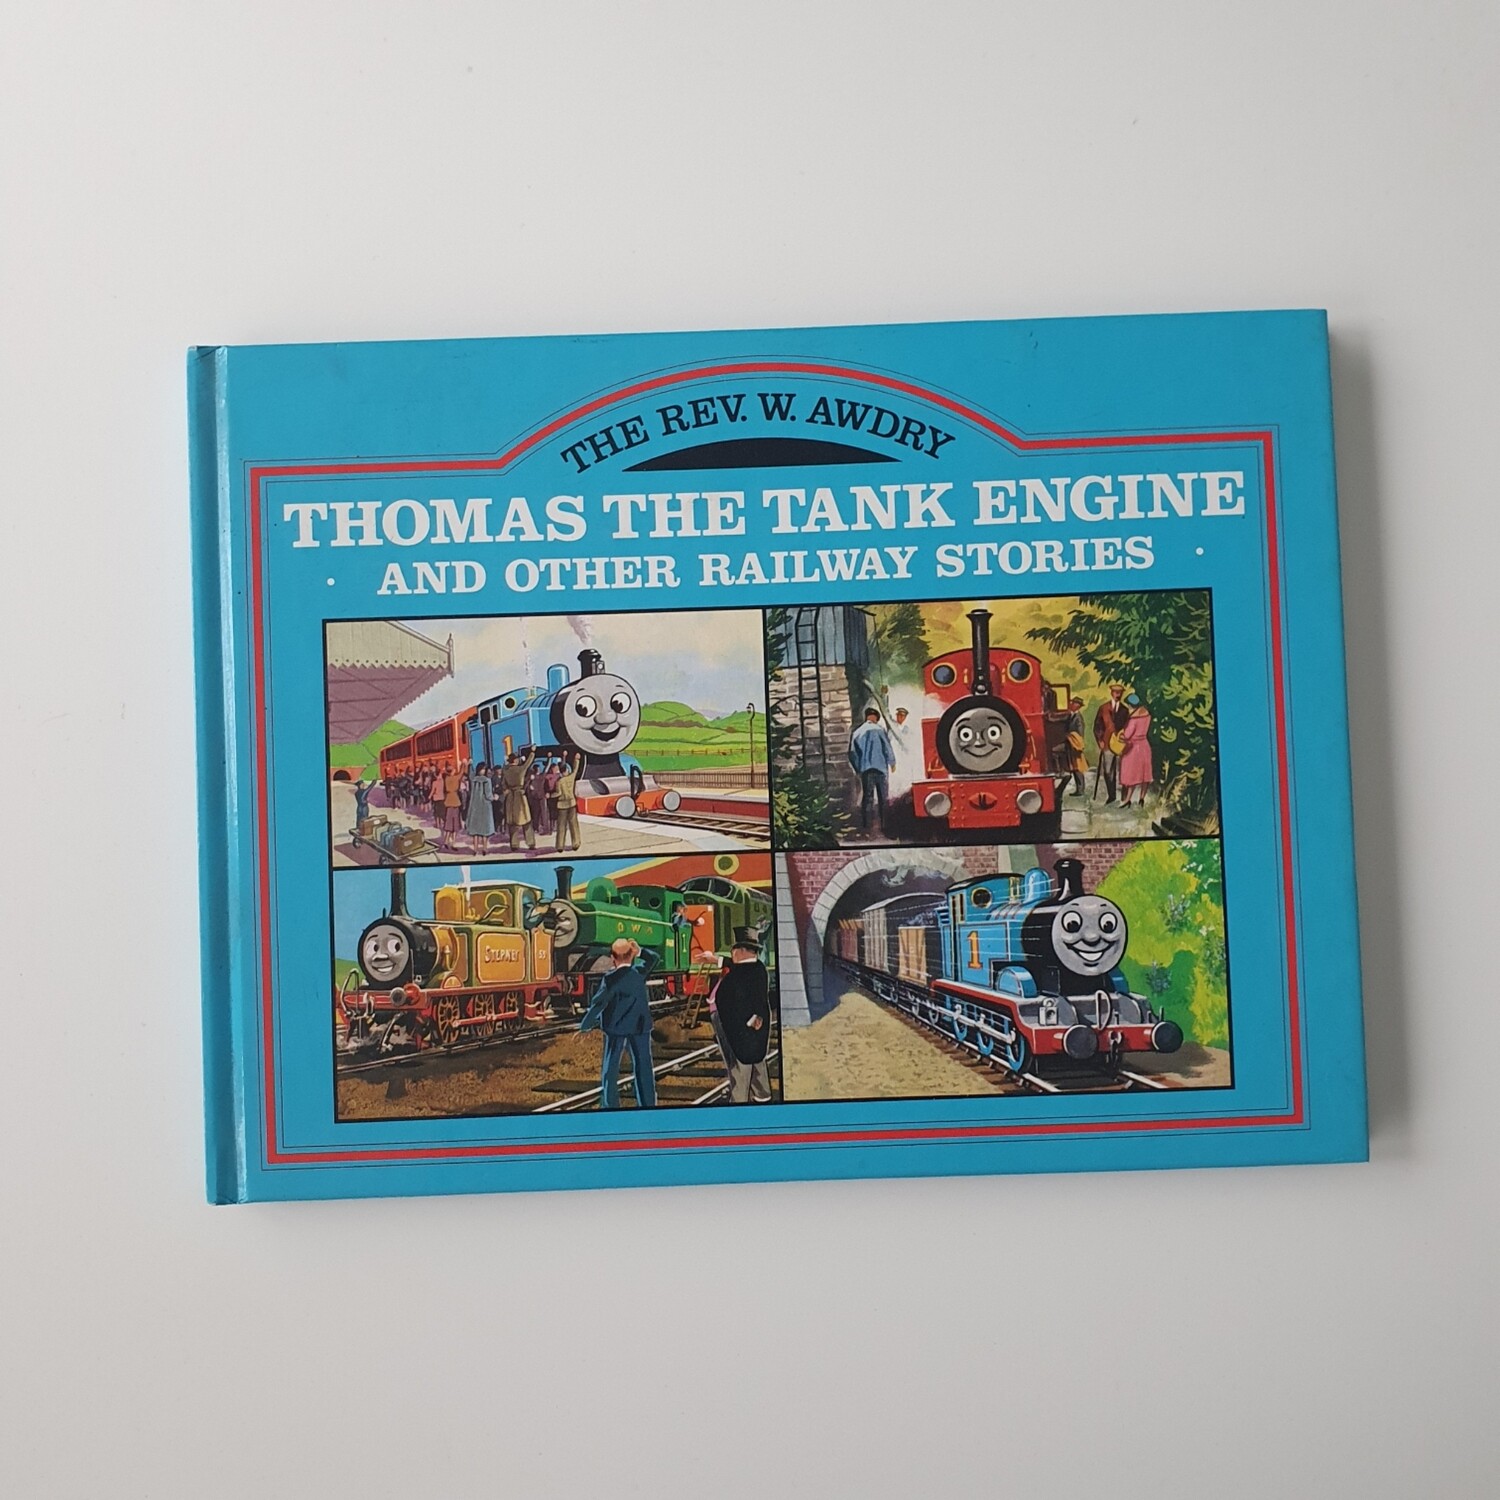 Thomas the Tank Engine and other railway stories 1990